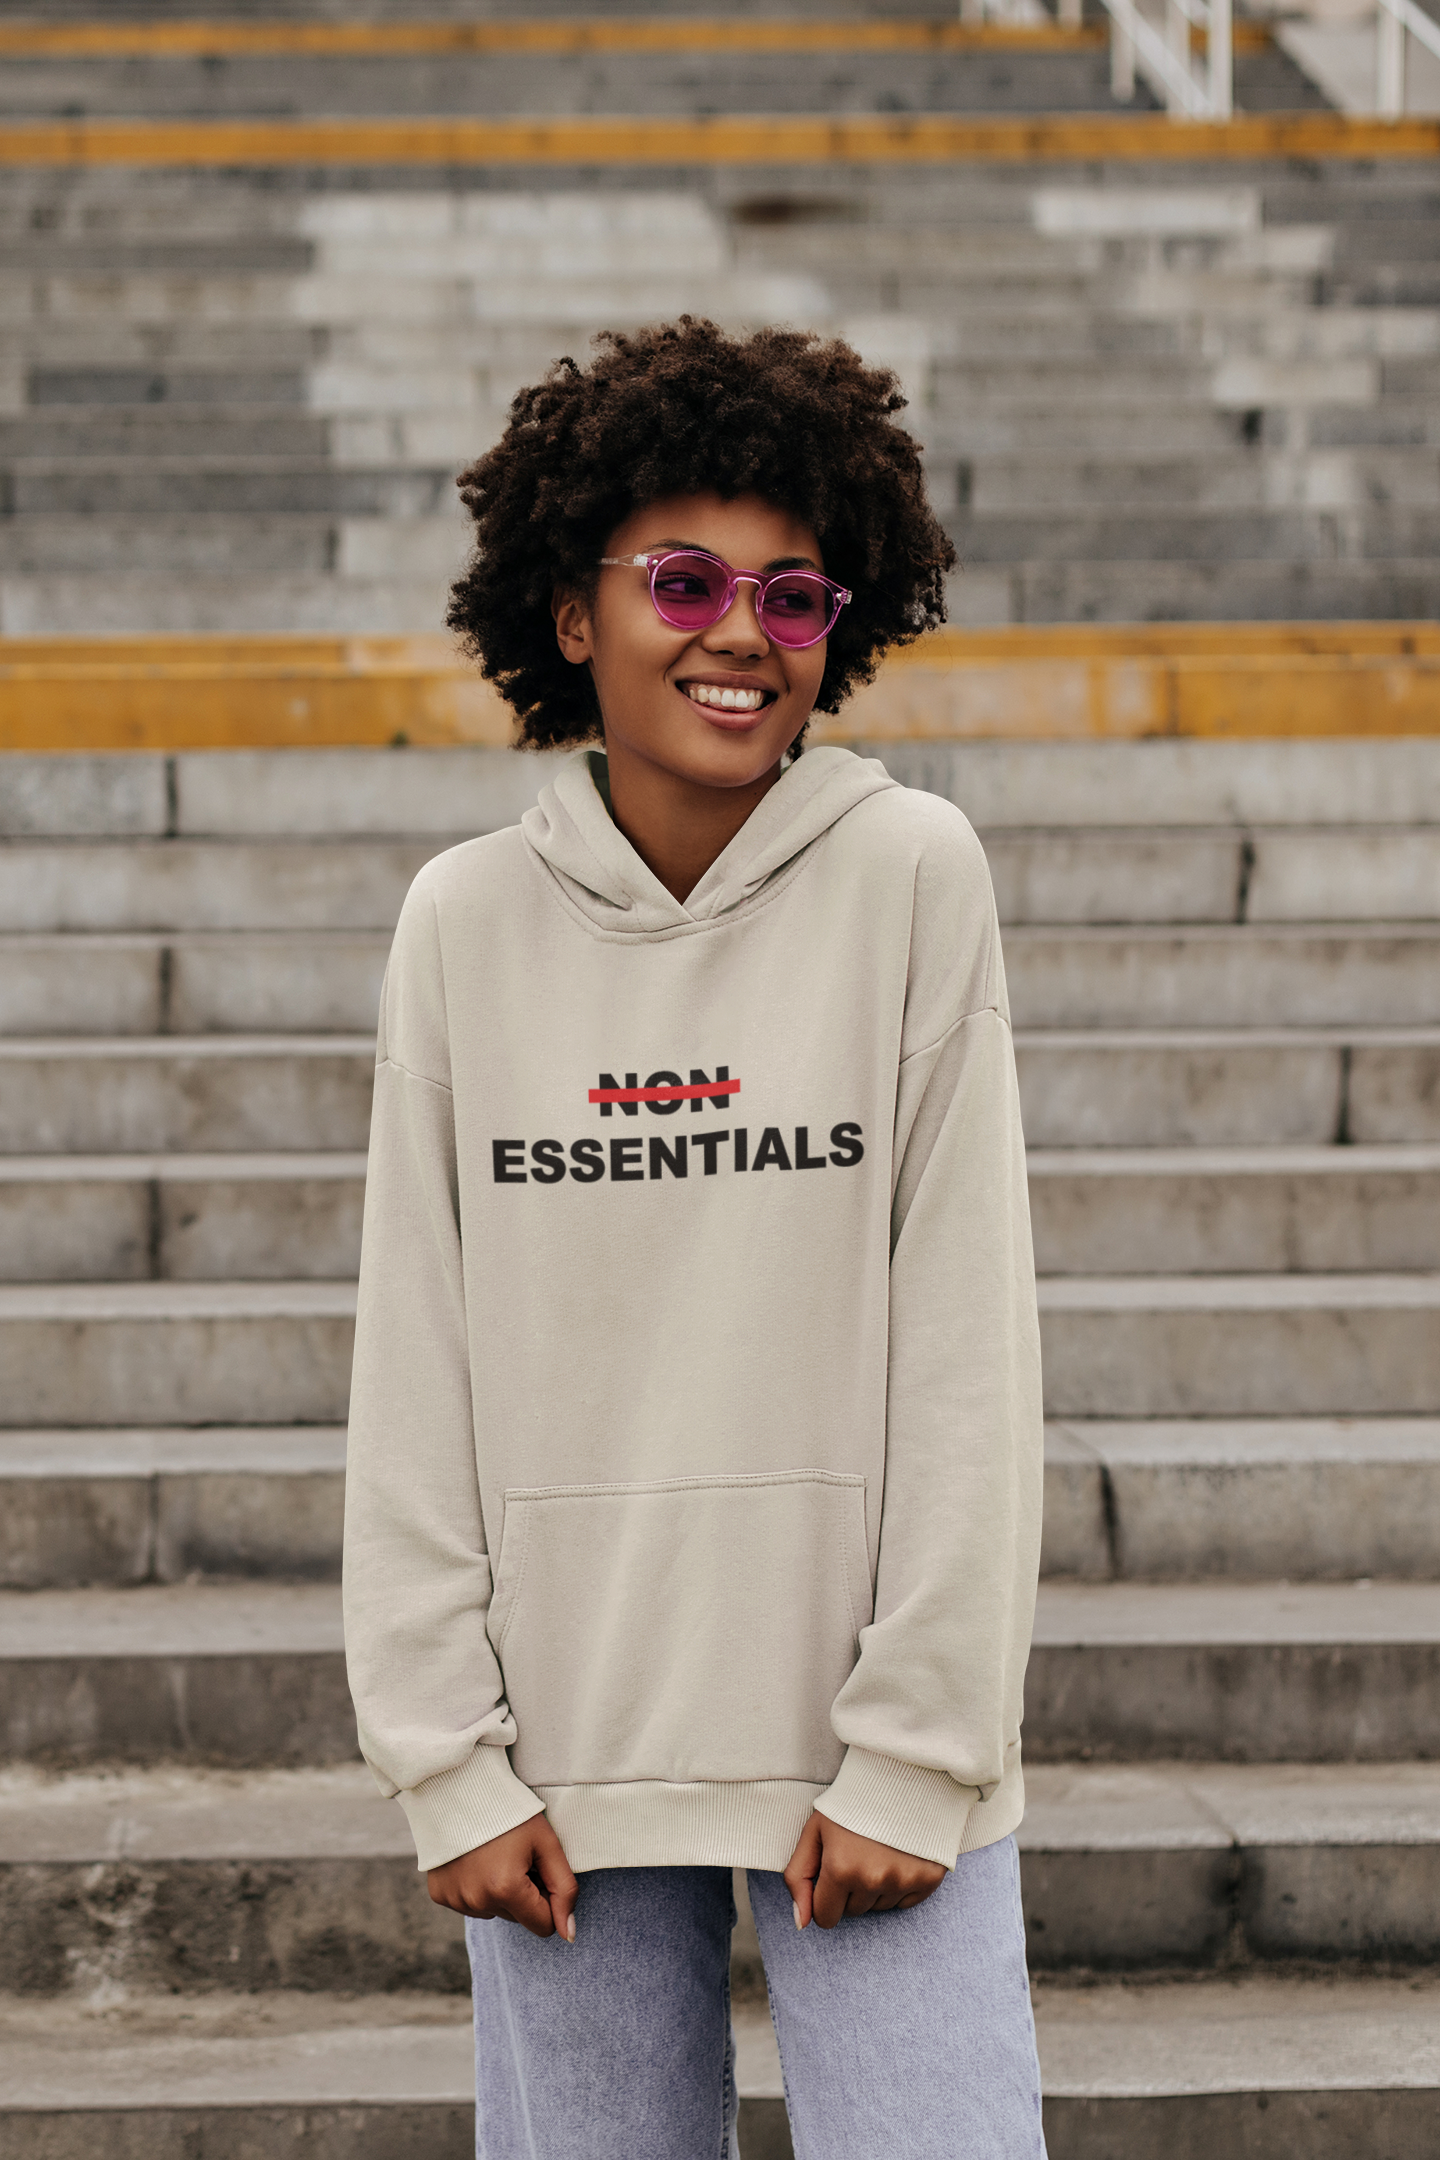 Essentials Brand Fear of God Unisex Hoodie, Pullover and sweatshirts, Pun on Essentials Branded logo on Sweatshirt,Phrase and quotes Hoodie and Sweatshirt Active